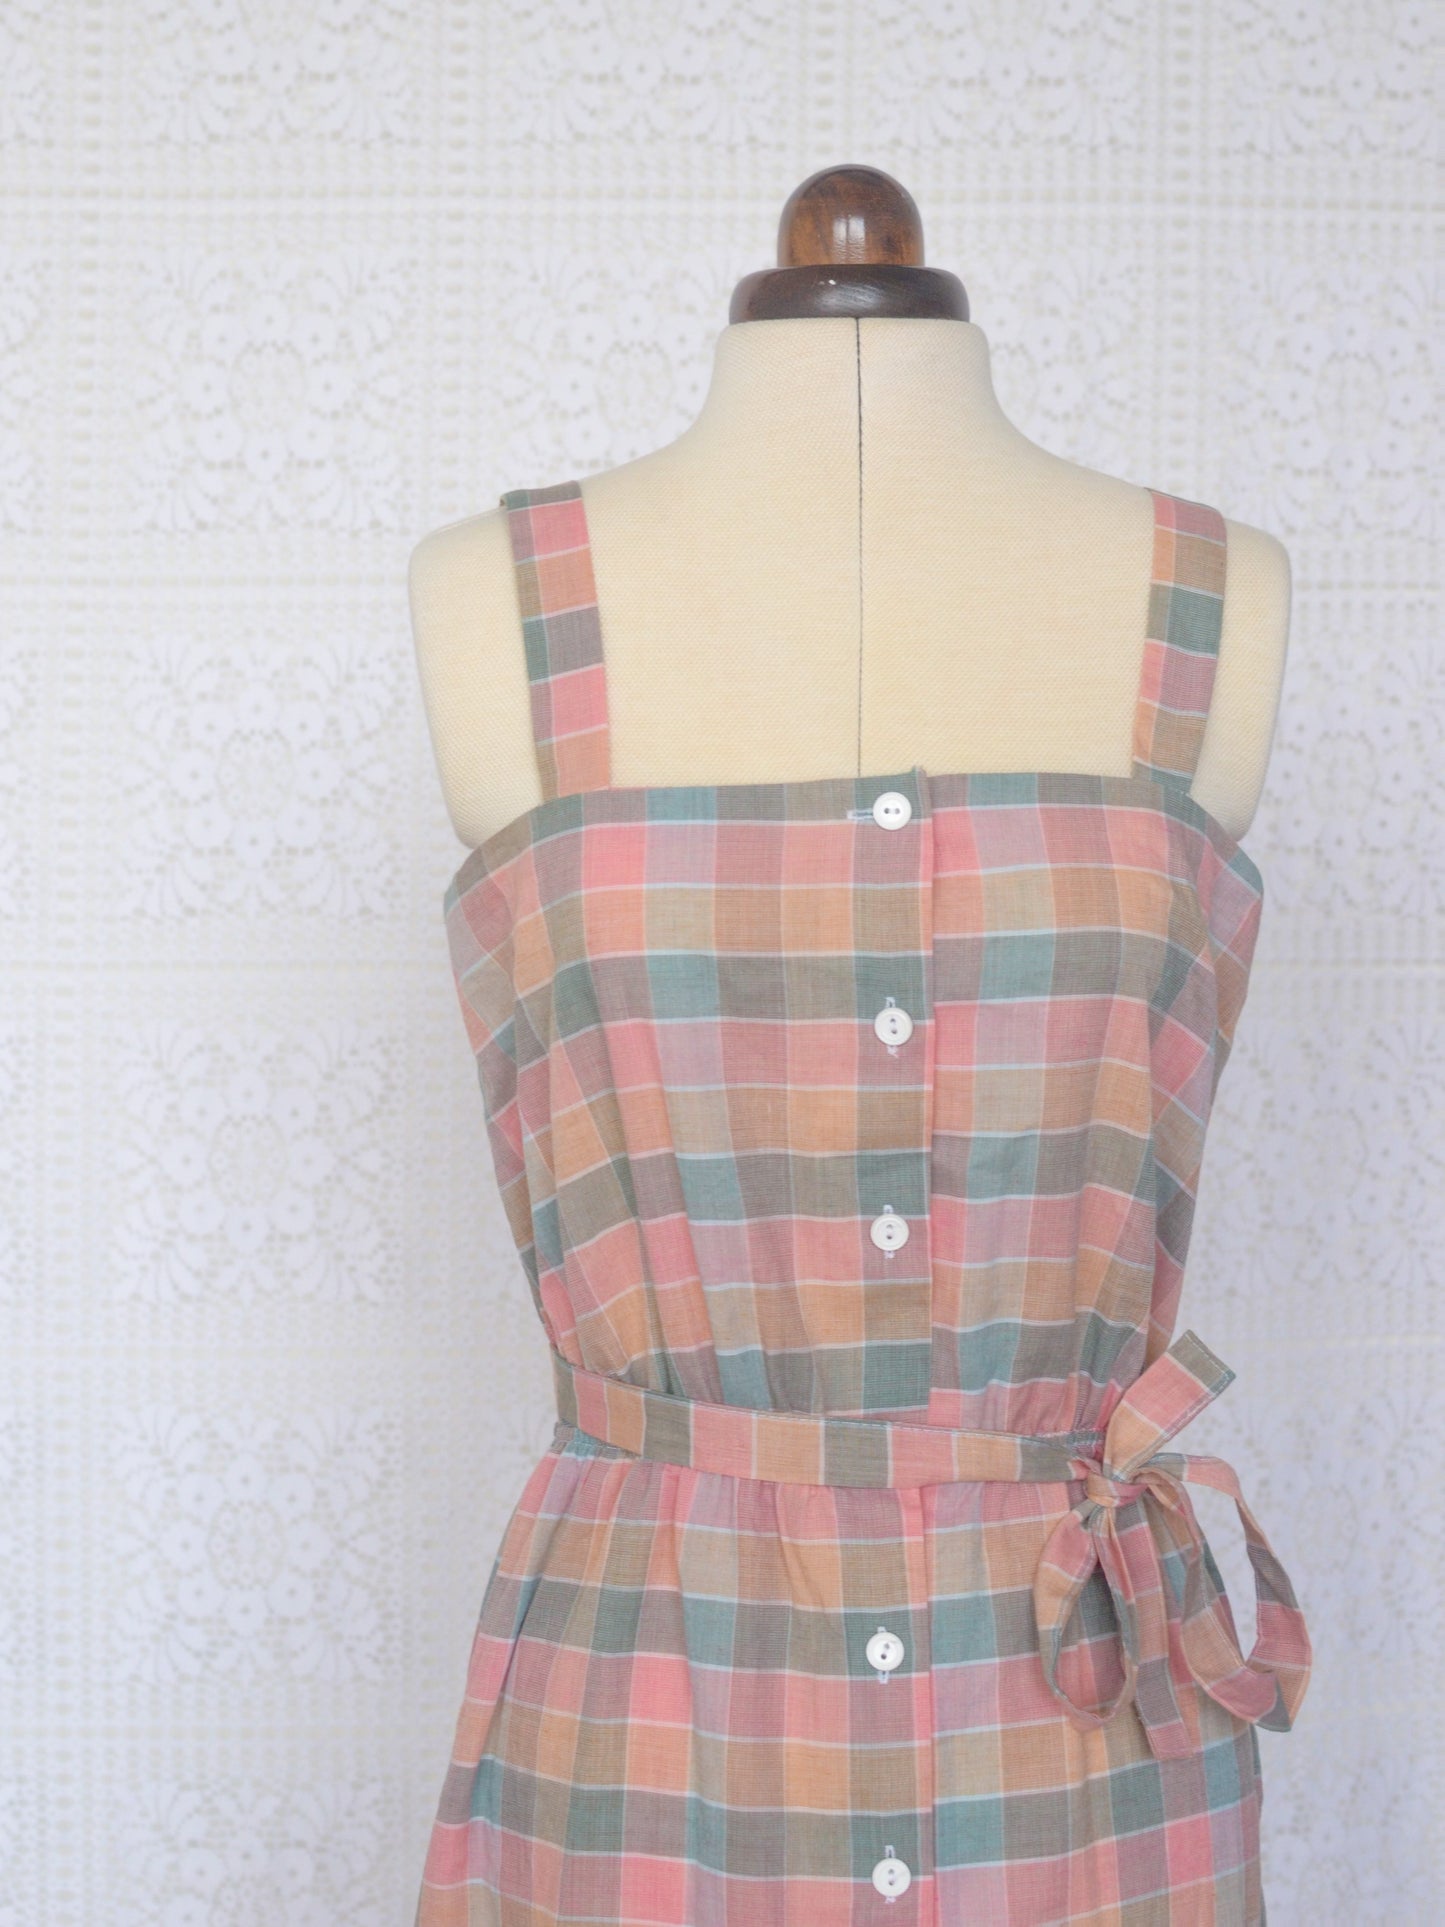 1990s style pink, grey and peach plaid strappy midi dress